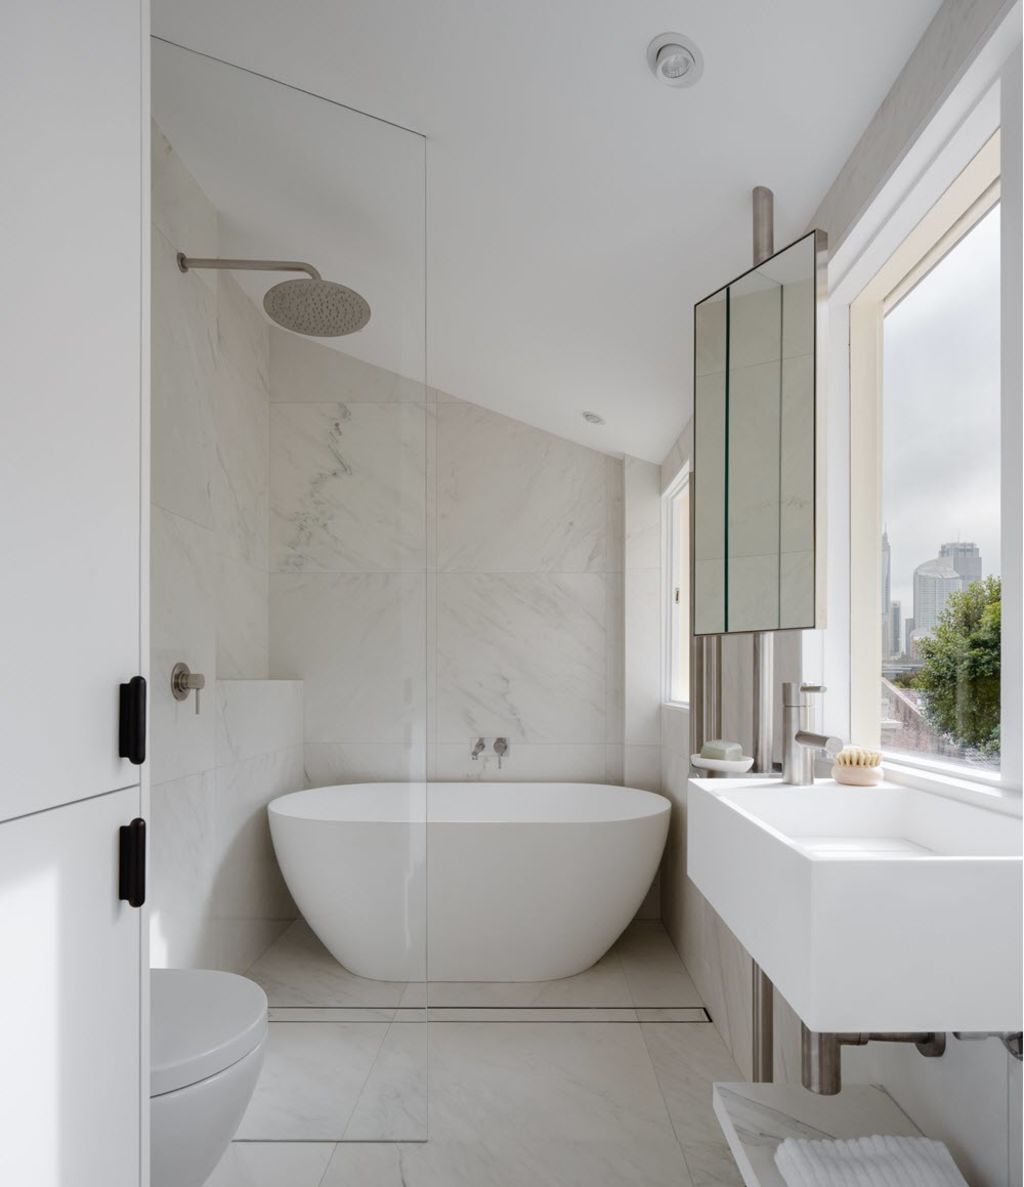 A luxurious outhouse that sees downtown Sydney. Photo: Katherine Lu